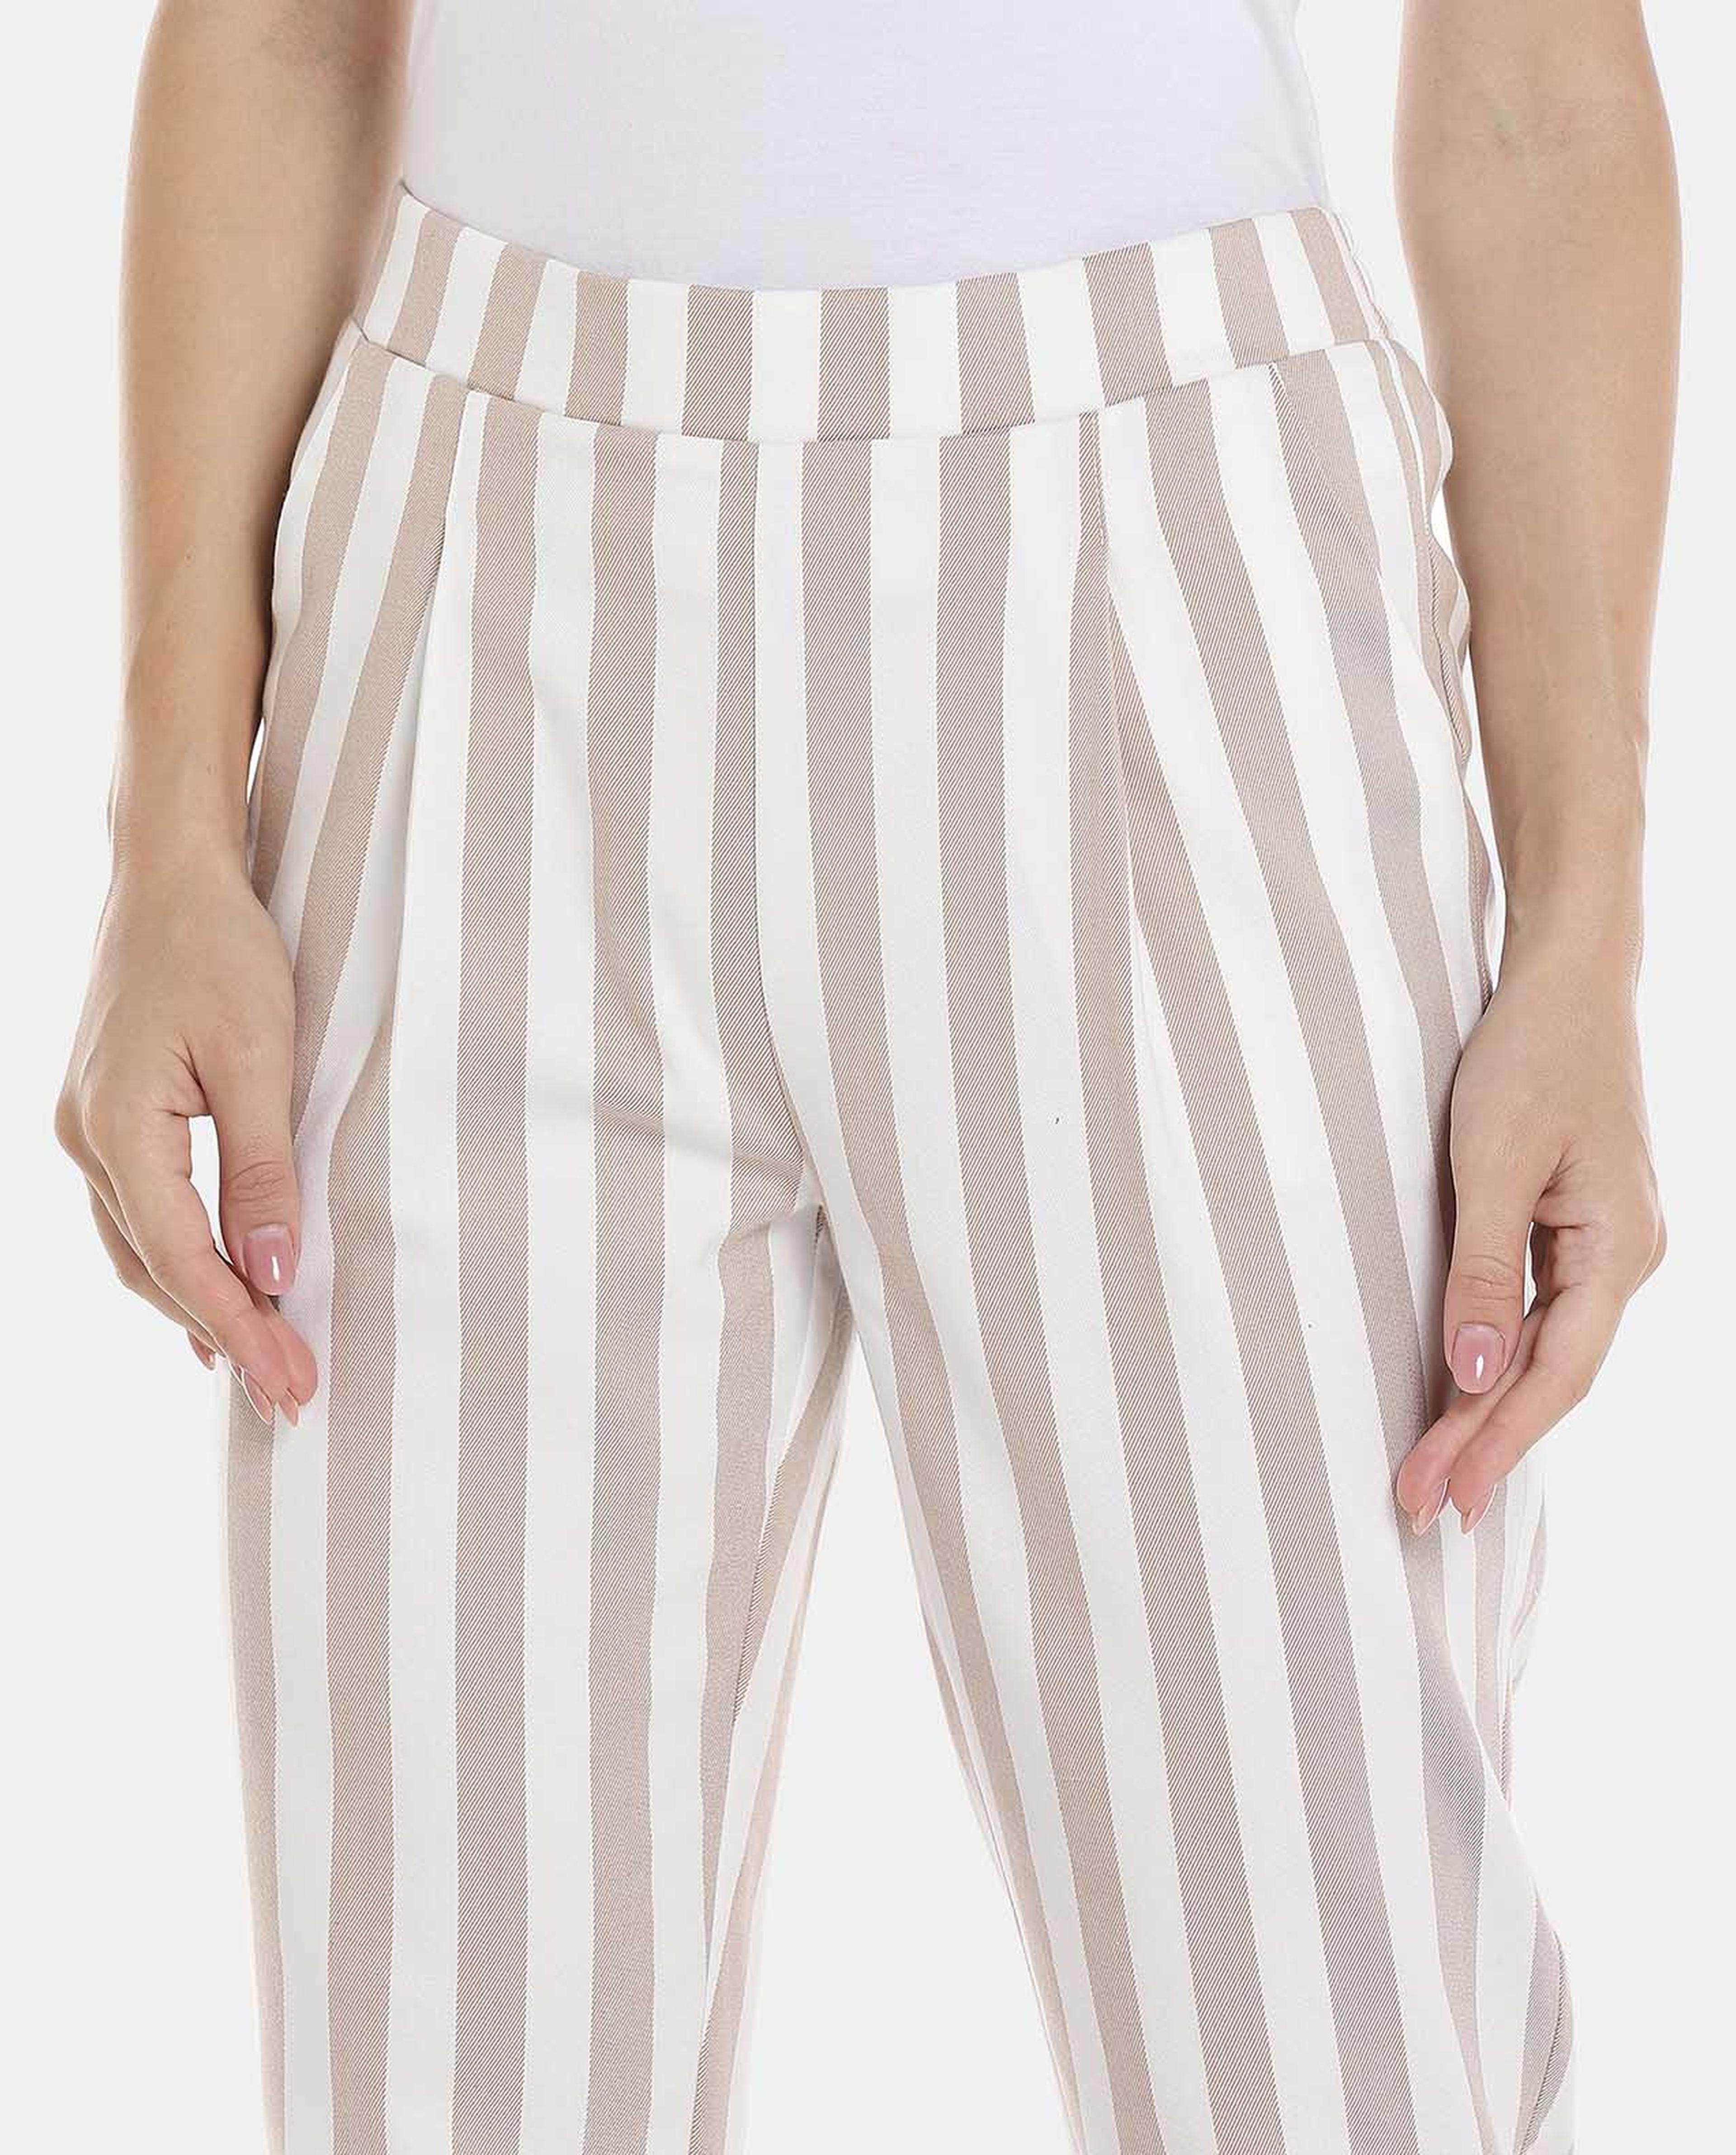 Striped Ankle Length Pants